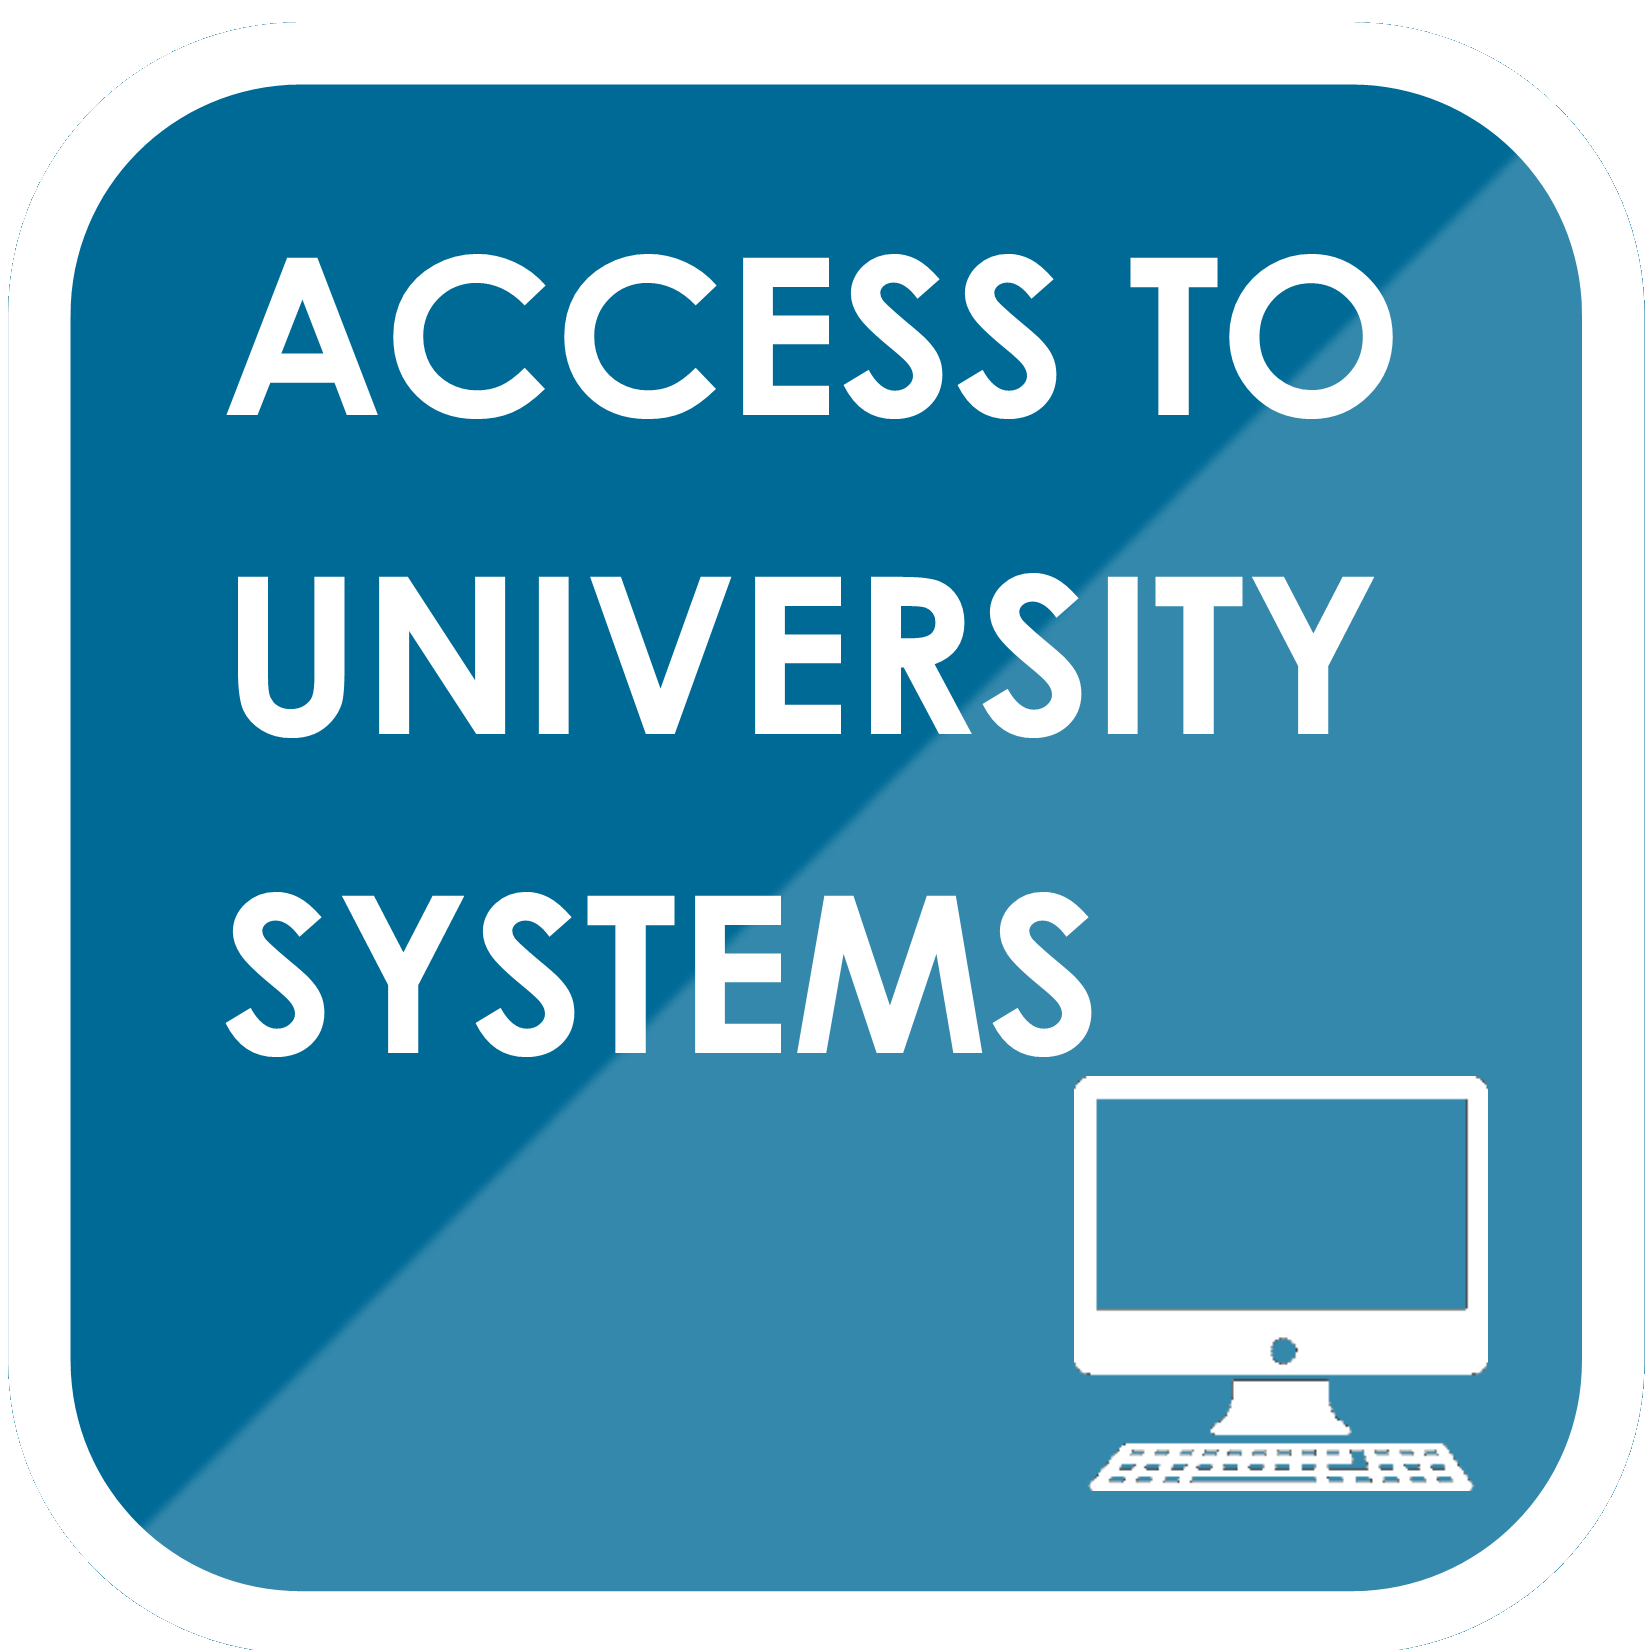 Access to University Systems